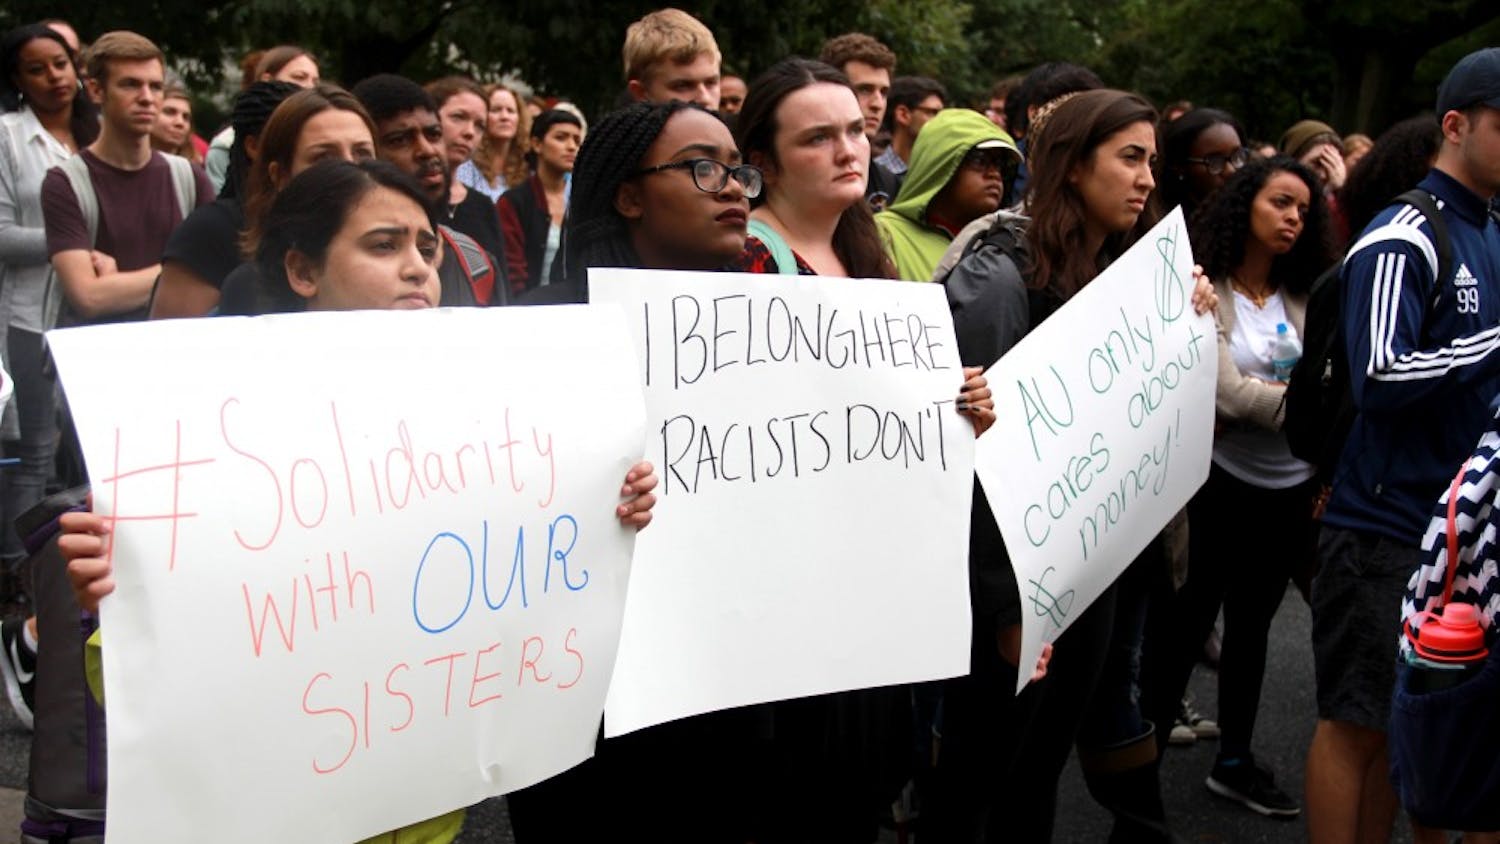 Students protest at the&nbsp;#SolidaritywithourSisters rally on the steps of MGC in September 2016.&nbsp;Hundreds gathered to speak out against racism on AU's campus.